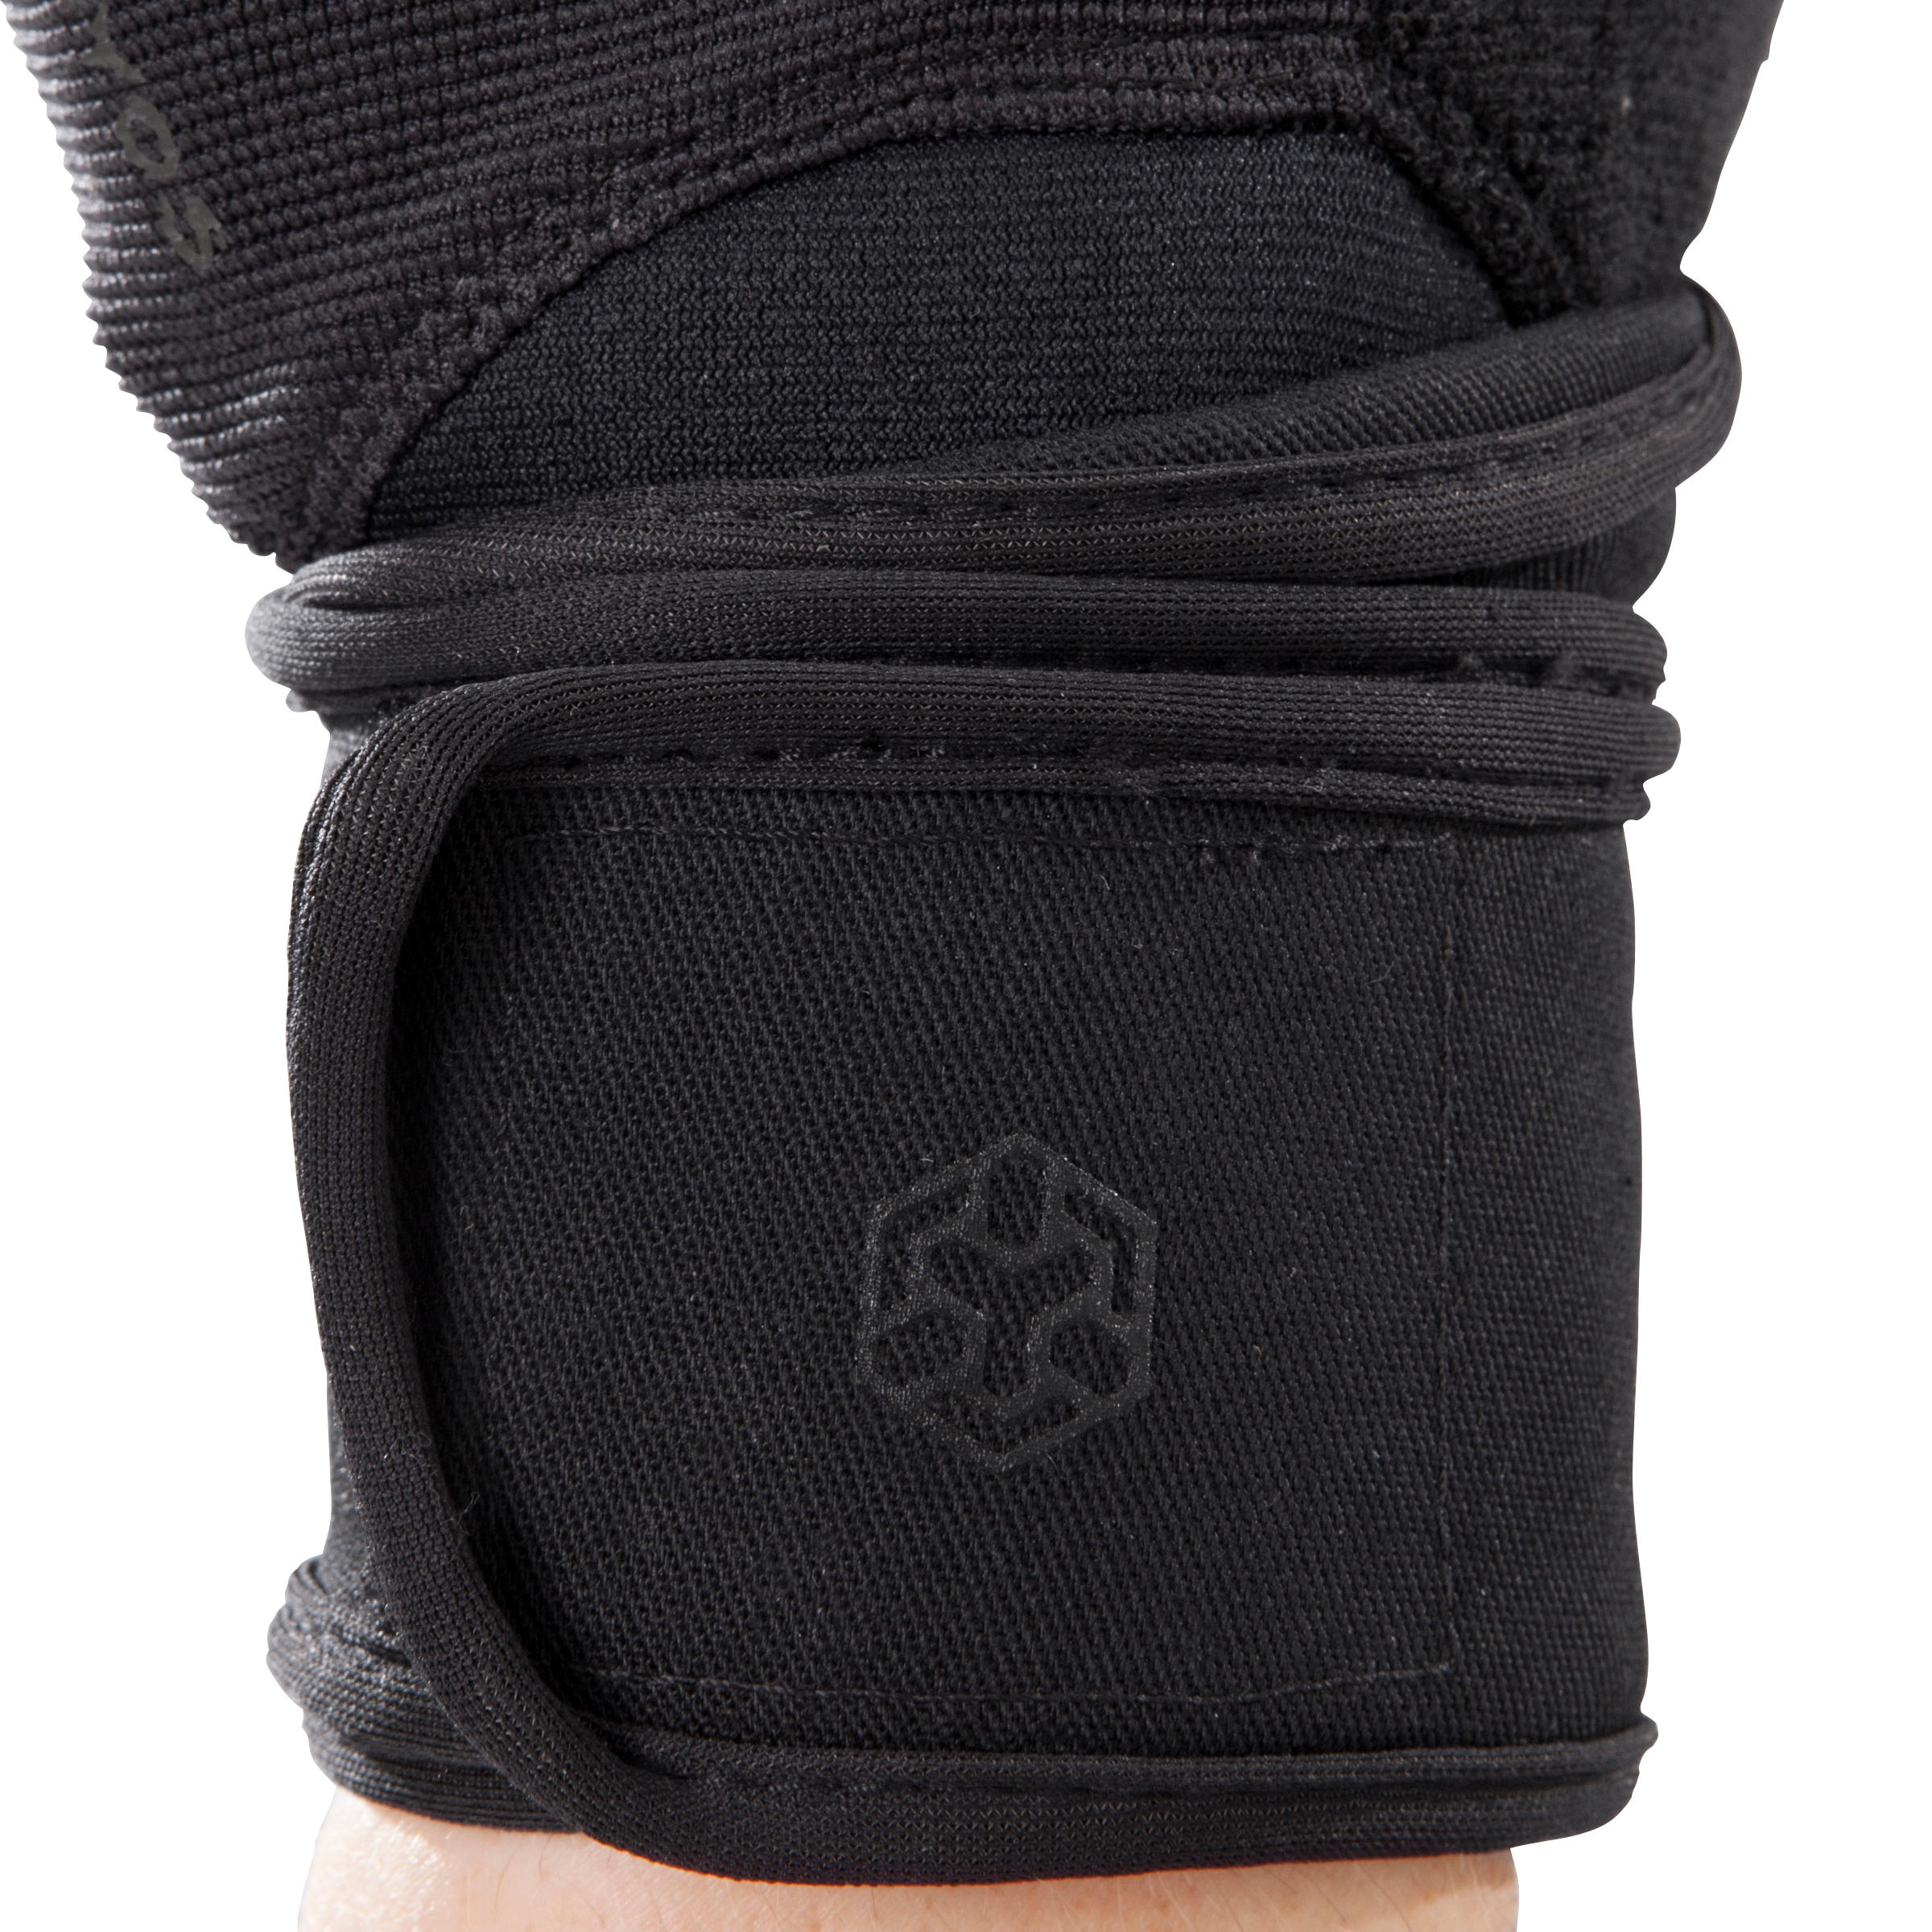 900 Weight Training Glove with Double Rip-Tab Cuff - Black/Grey 6/10